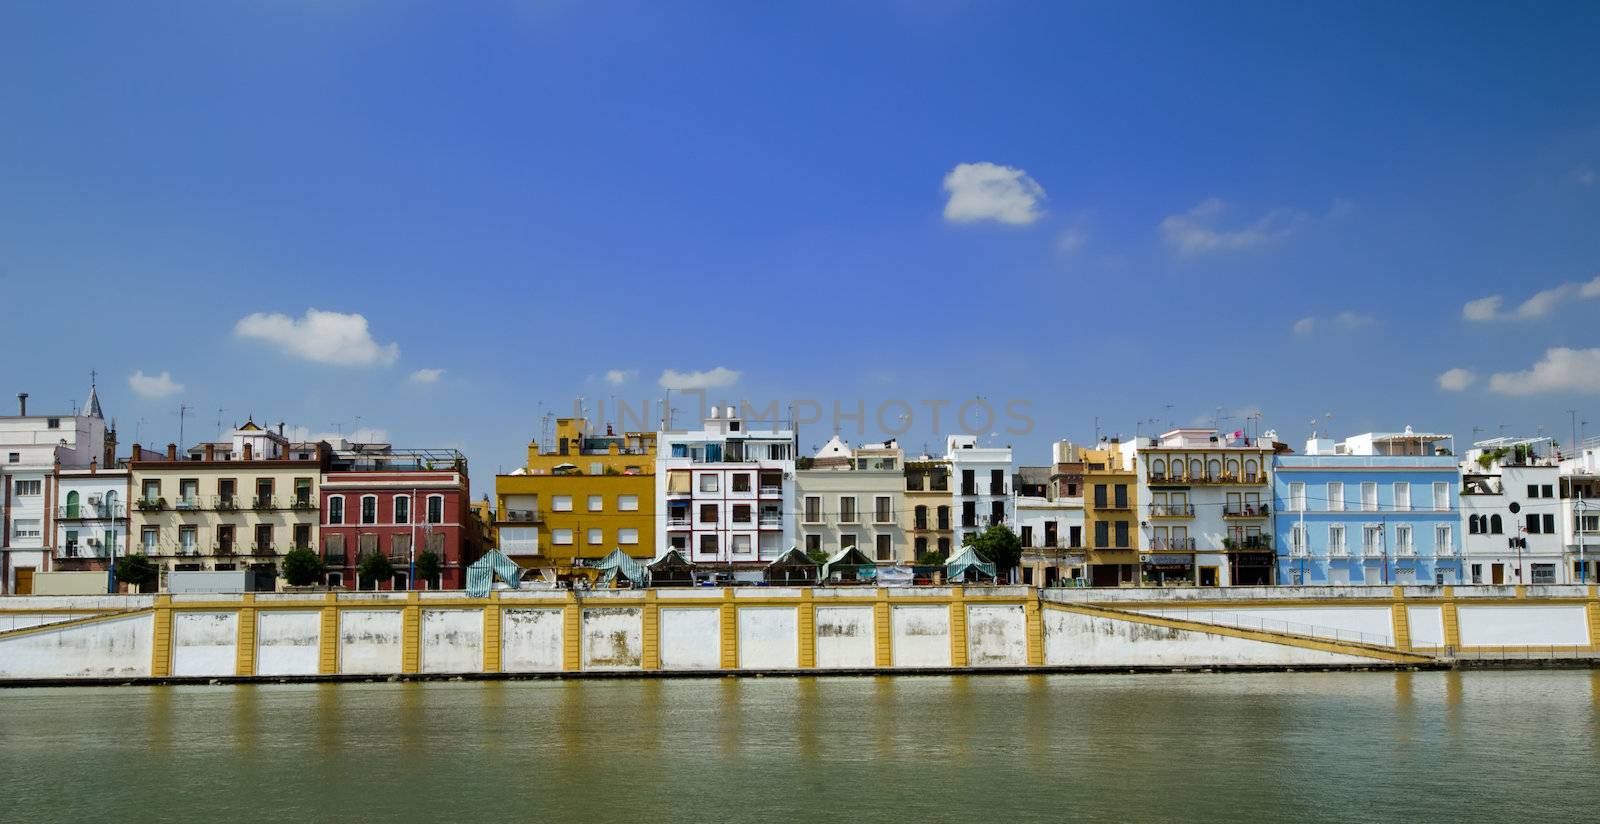 Seville and the Guadalquivir